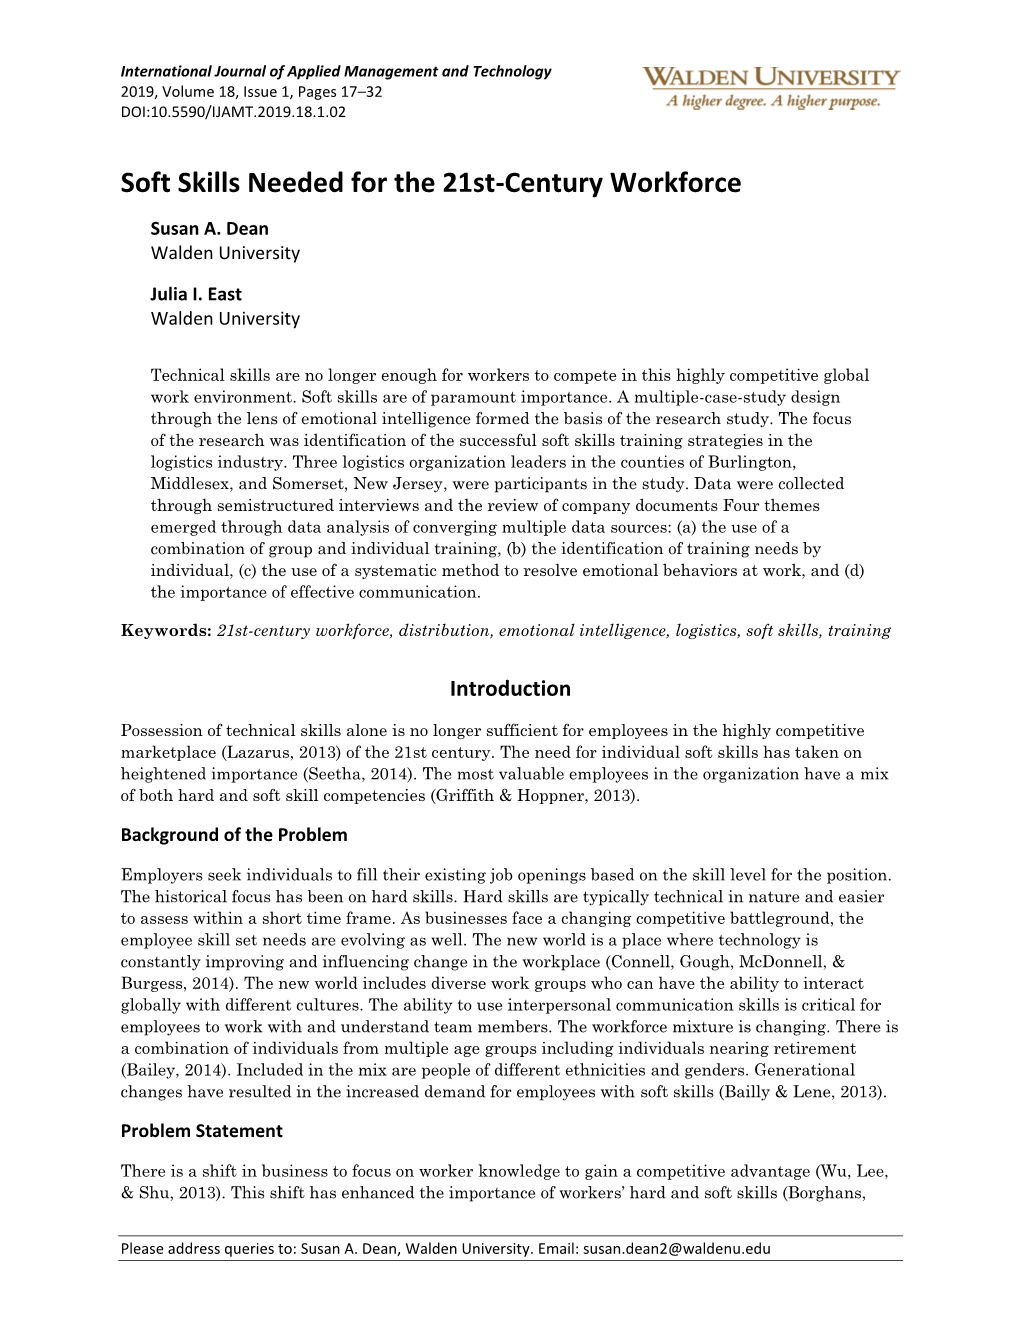 Soft Skills Needed for the 21St-Century Workforce